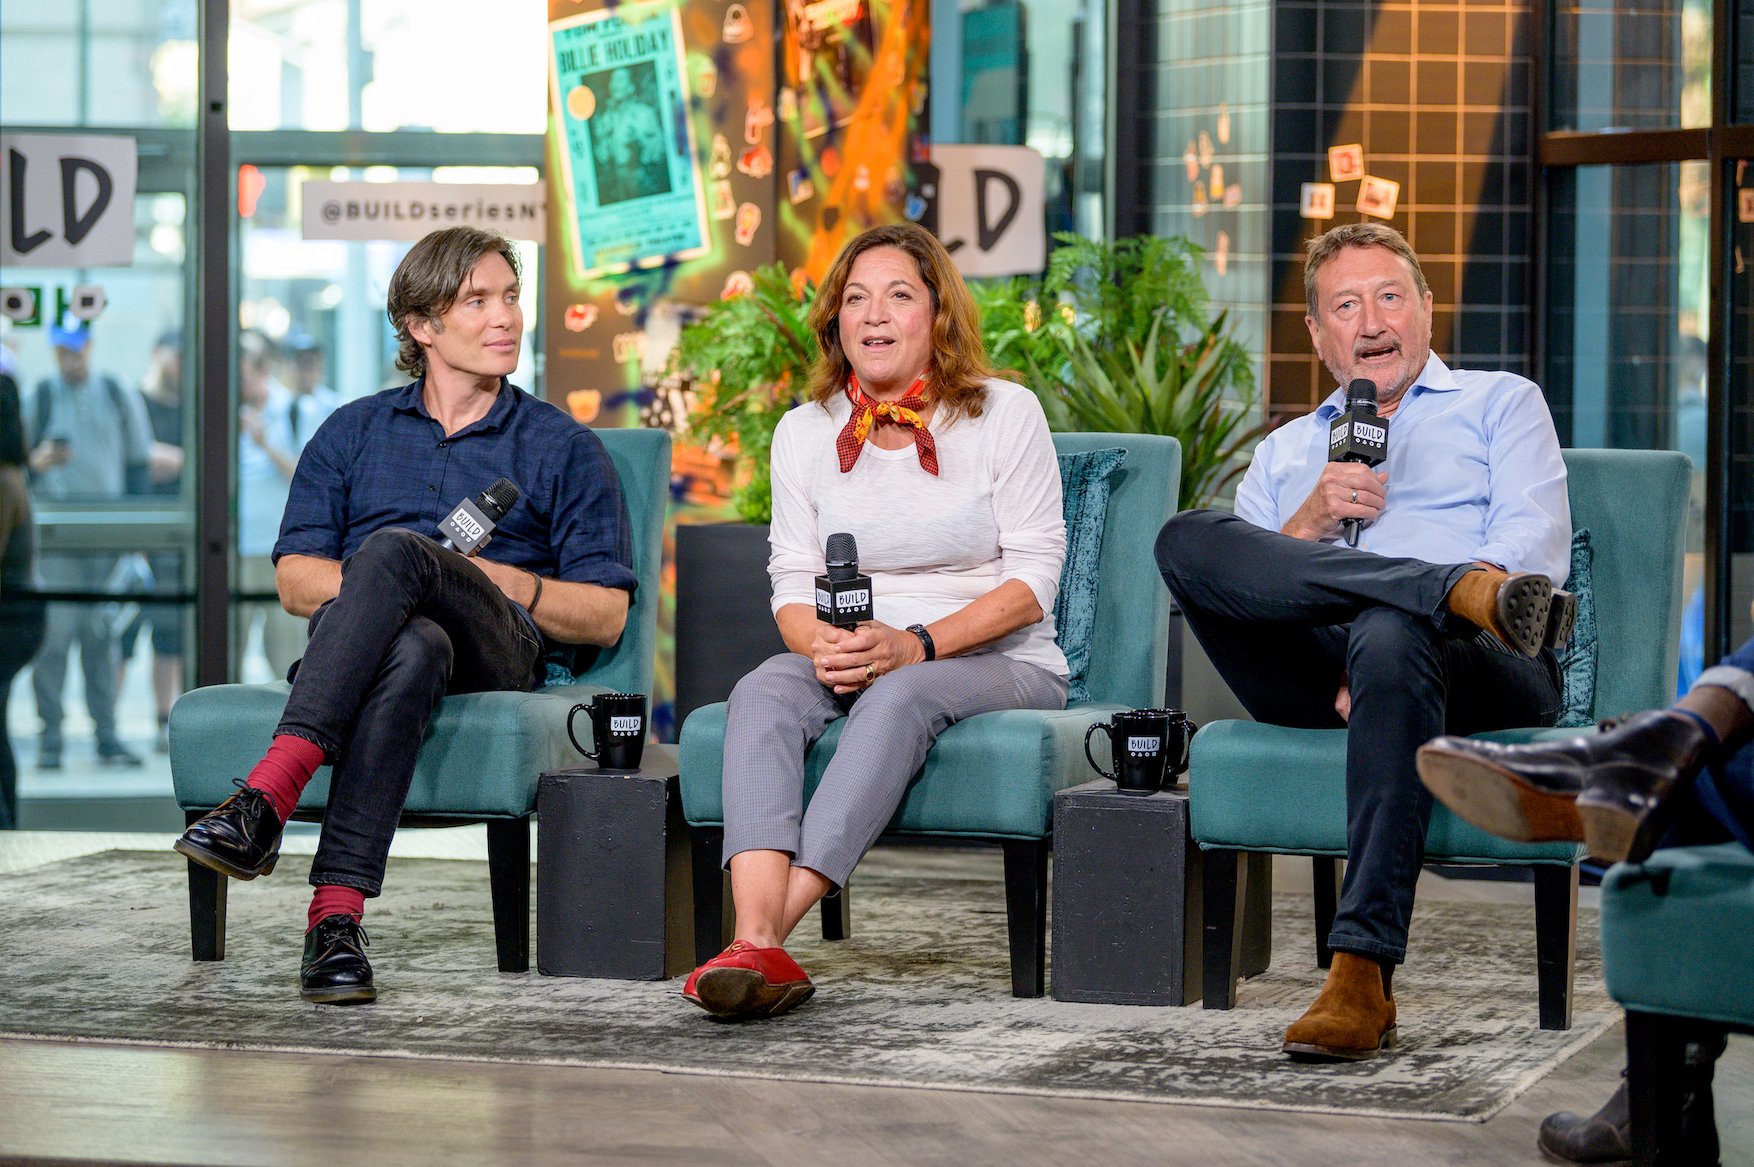 Cillian Murphy, Caryn Mandabach, and Steven Knight, actors and creators of 'Peaky Blinders' Season 6, sitting on a couch to discuss 'Peaky Blinders' with the Build Series